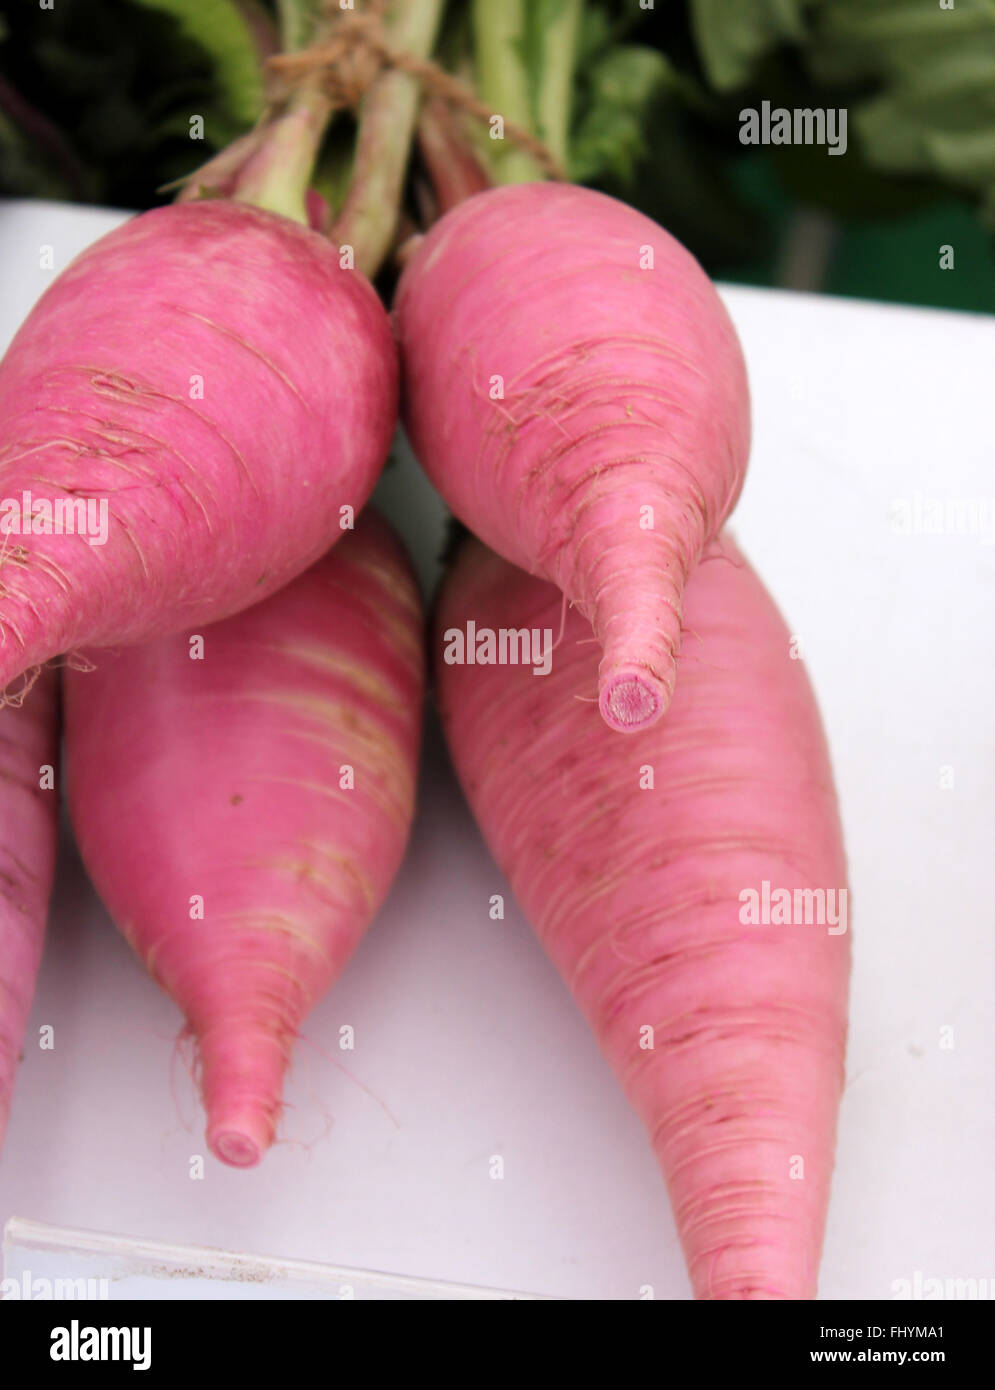 Raphanus sativus, PUSA Gulabi radish, cultivar with long rose coloured roots, commonly used in salads, vegetable crop Stock Photo